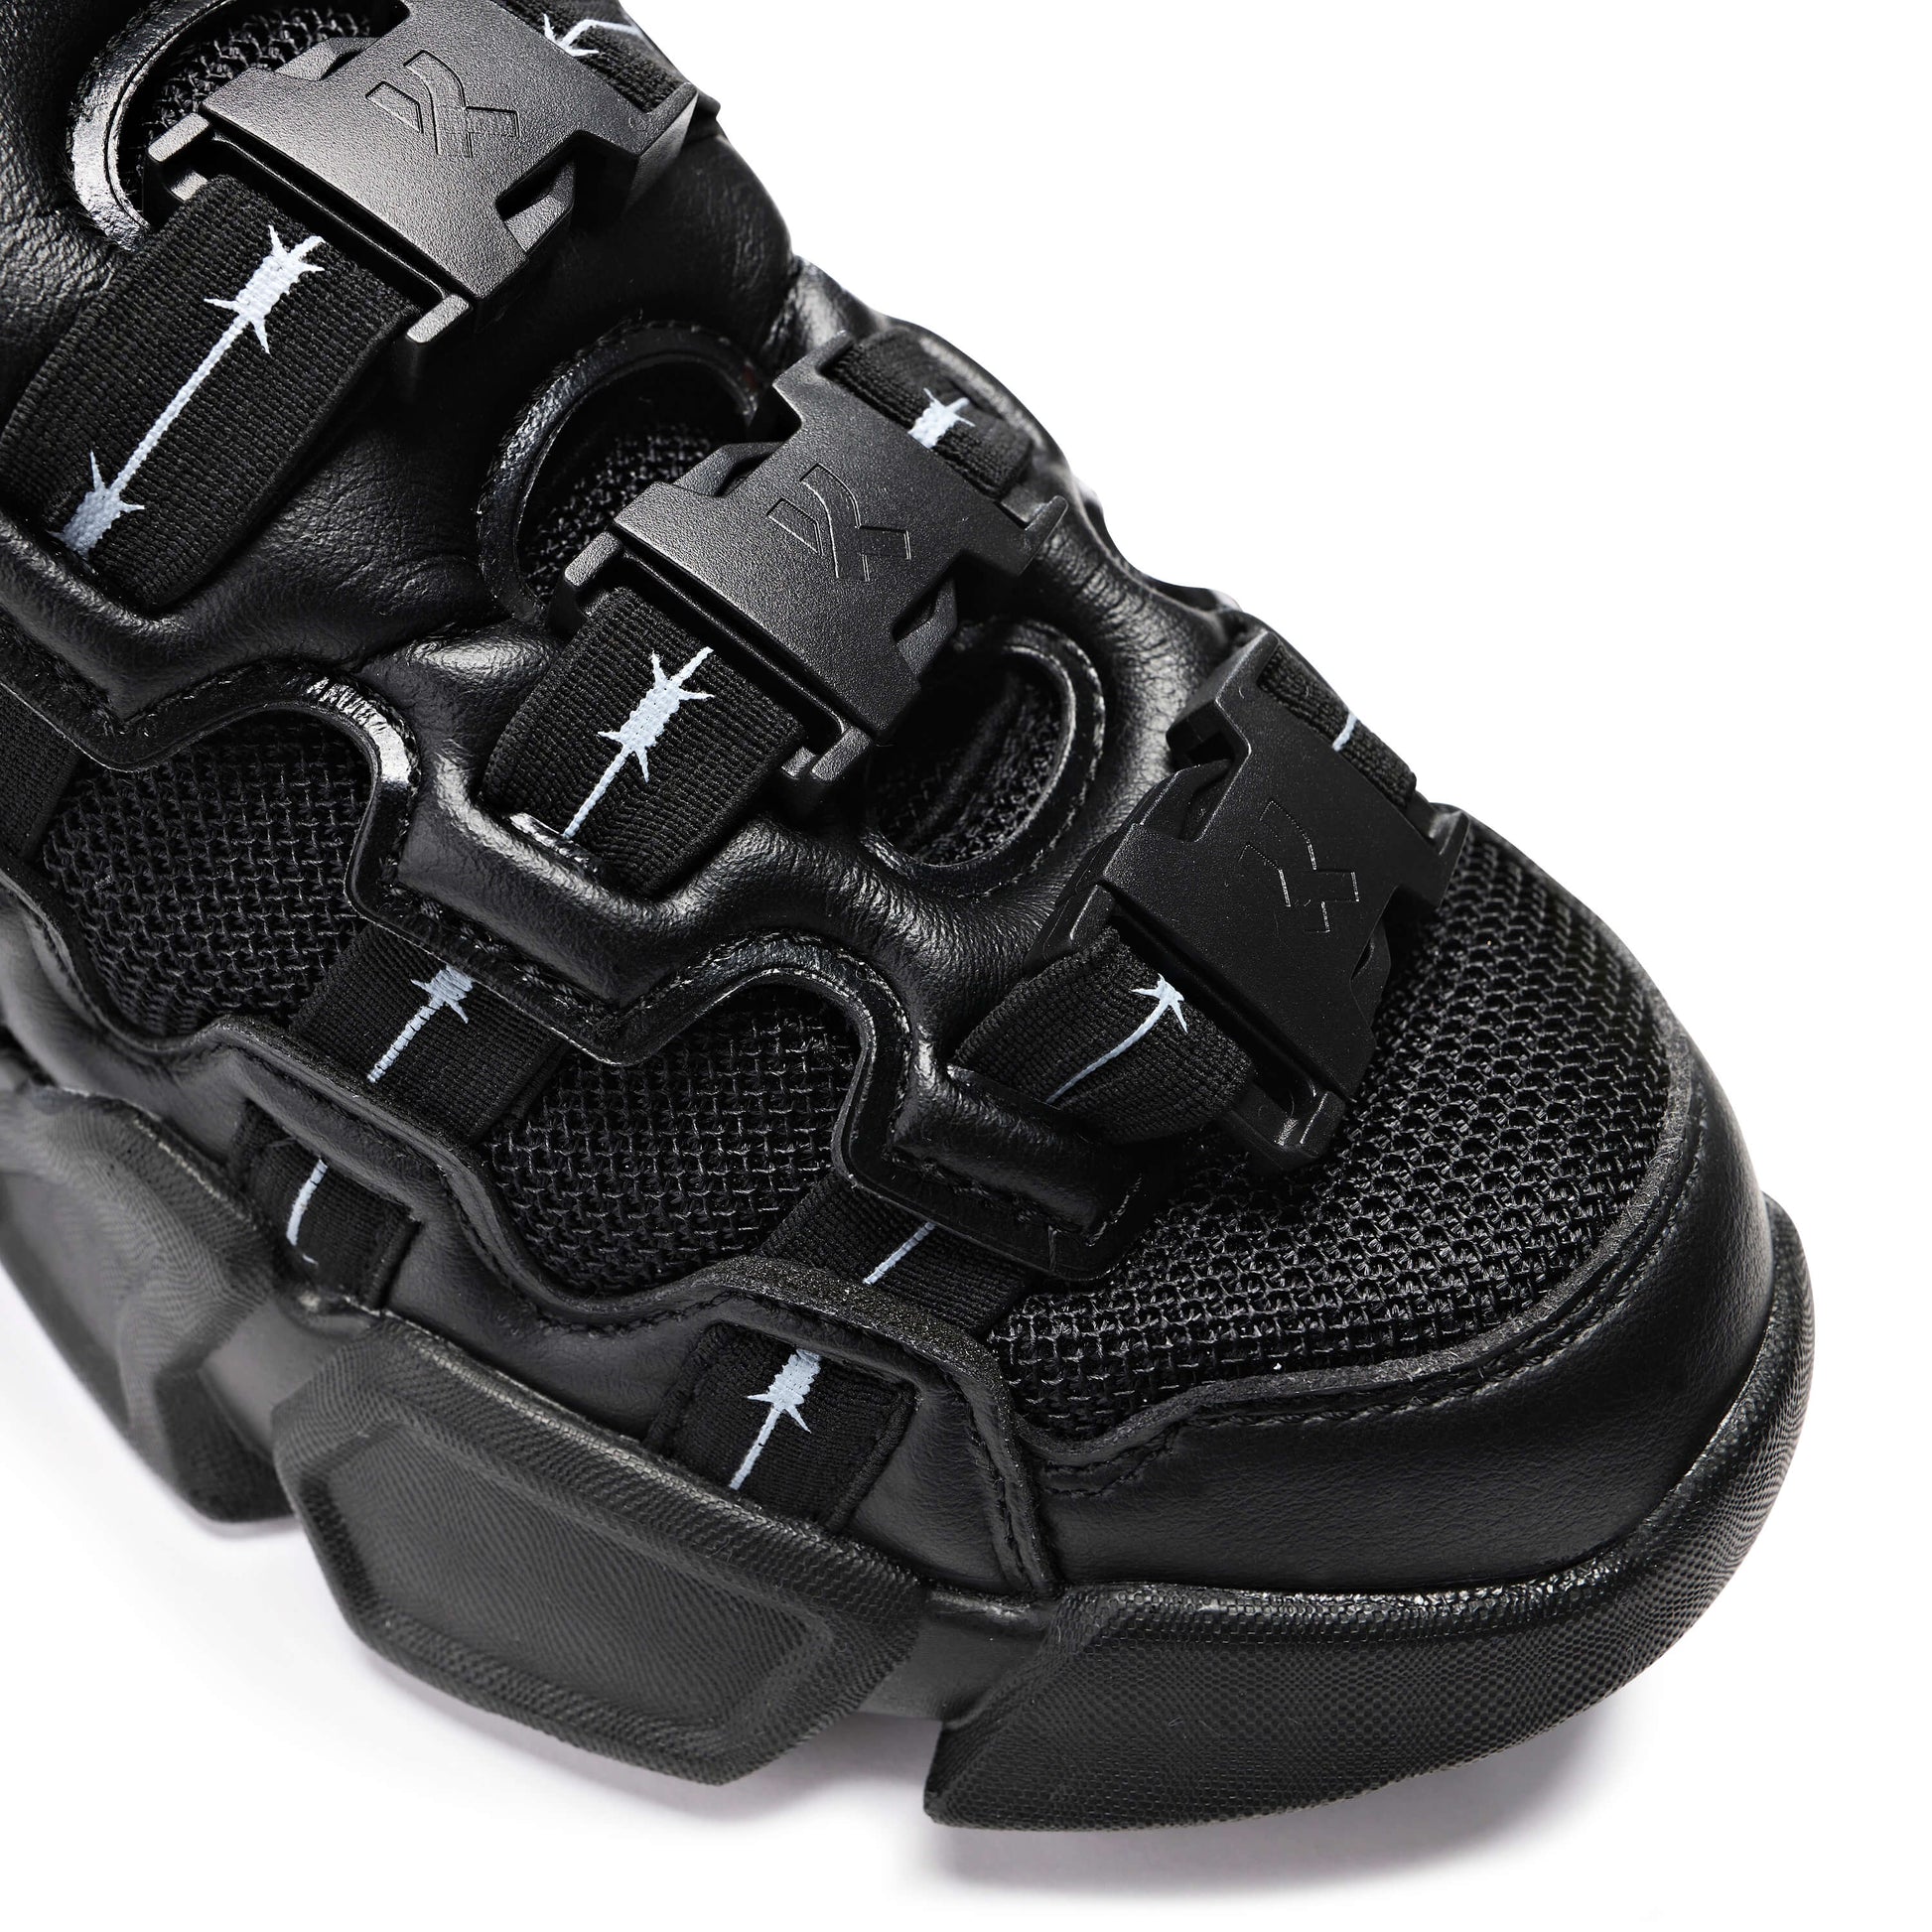 The Beast Black Wire Trainers - Trainers - KOI Footwear - Black - Front Detail